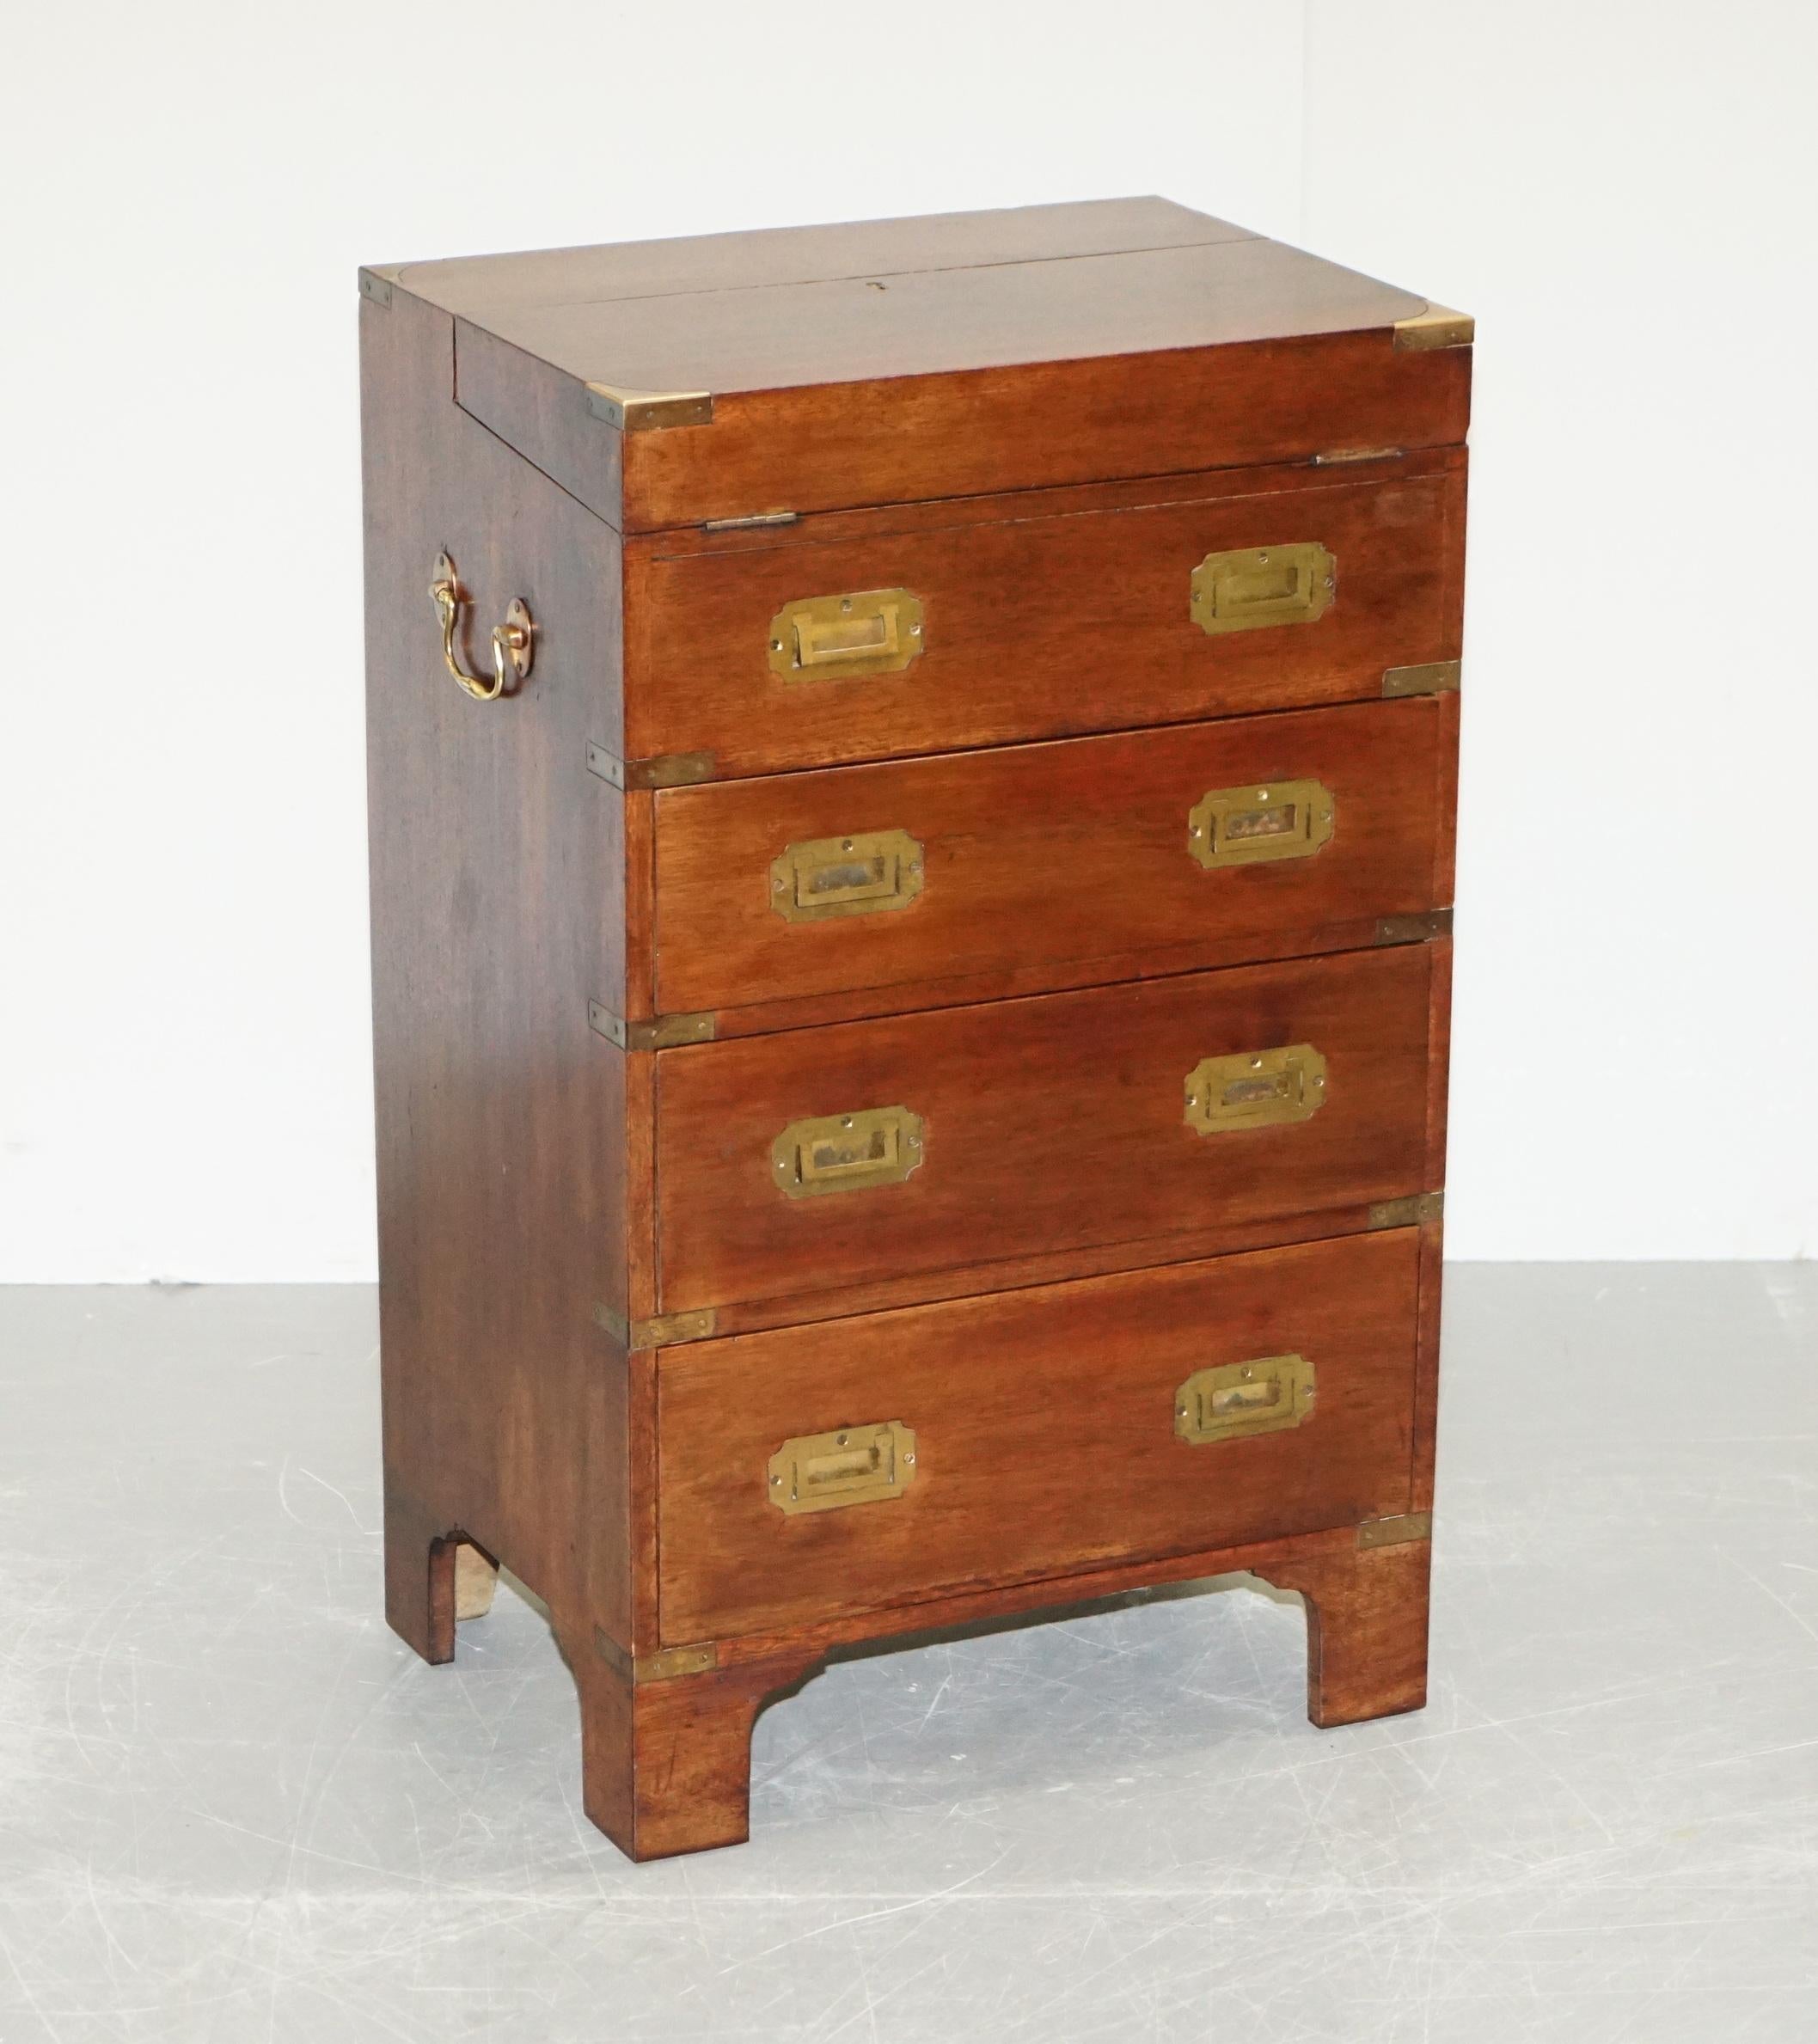 Wimbledon-Furniture

Wimbledon-Furniture is delighted to offer for sale this lovely hand made in England Kennedy Furniture retailed through Harrods London Military Campaign chest of drawers with writing slope

Please note the delivery fee listed